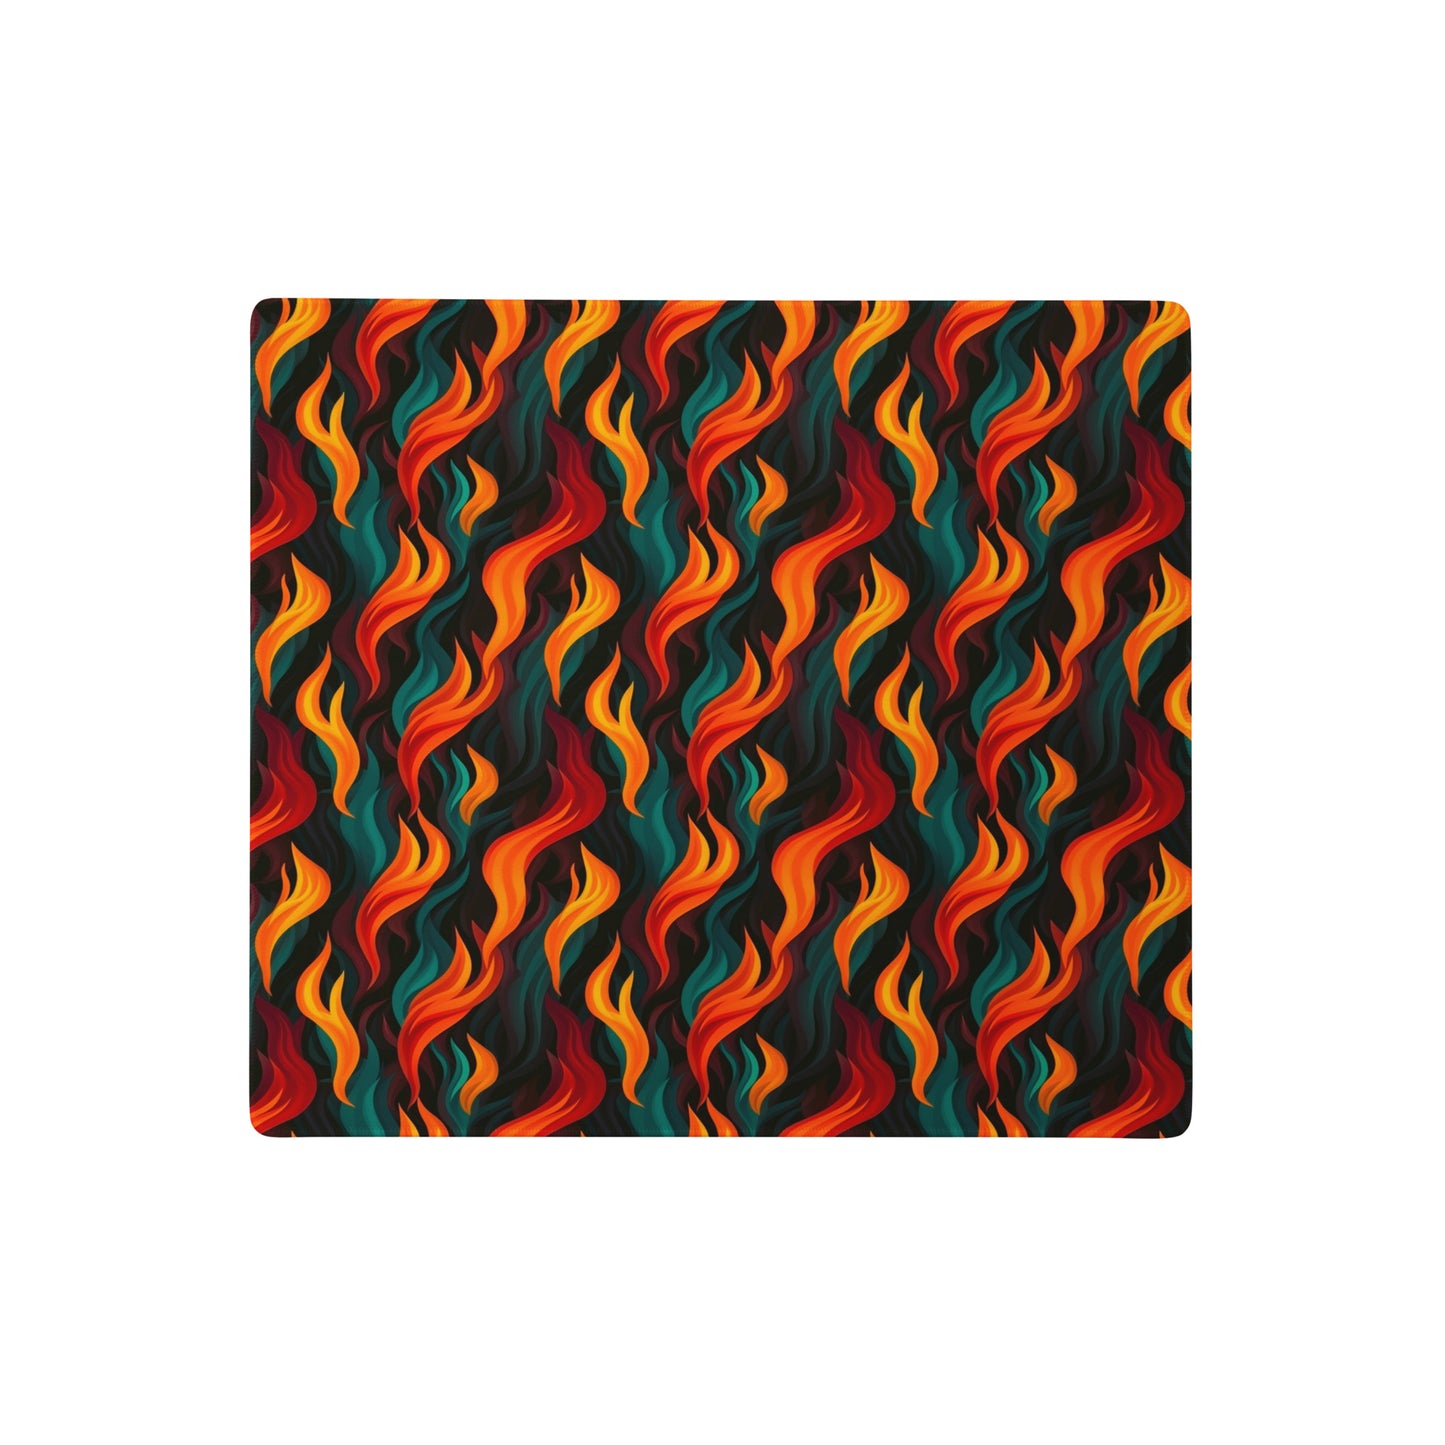 A 18" x 16" desk pad with a wavy flame pattern on it. Red and Teal in color.